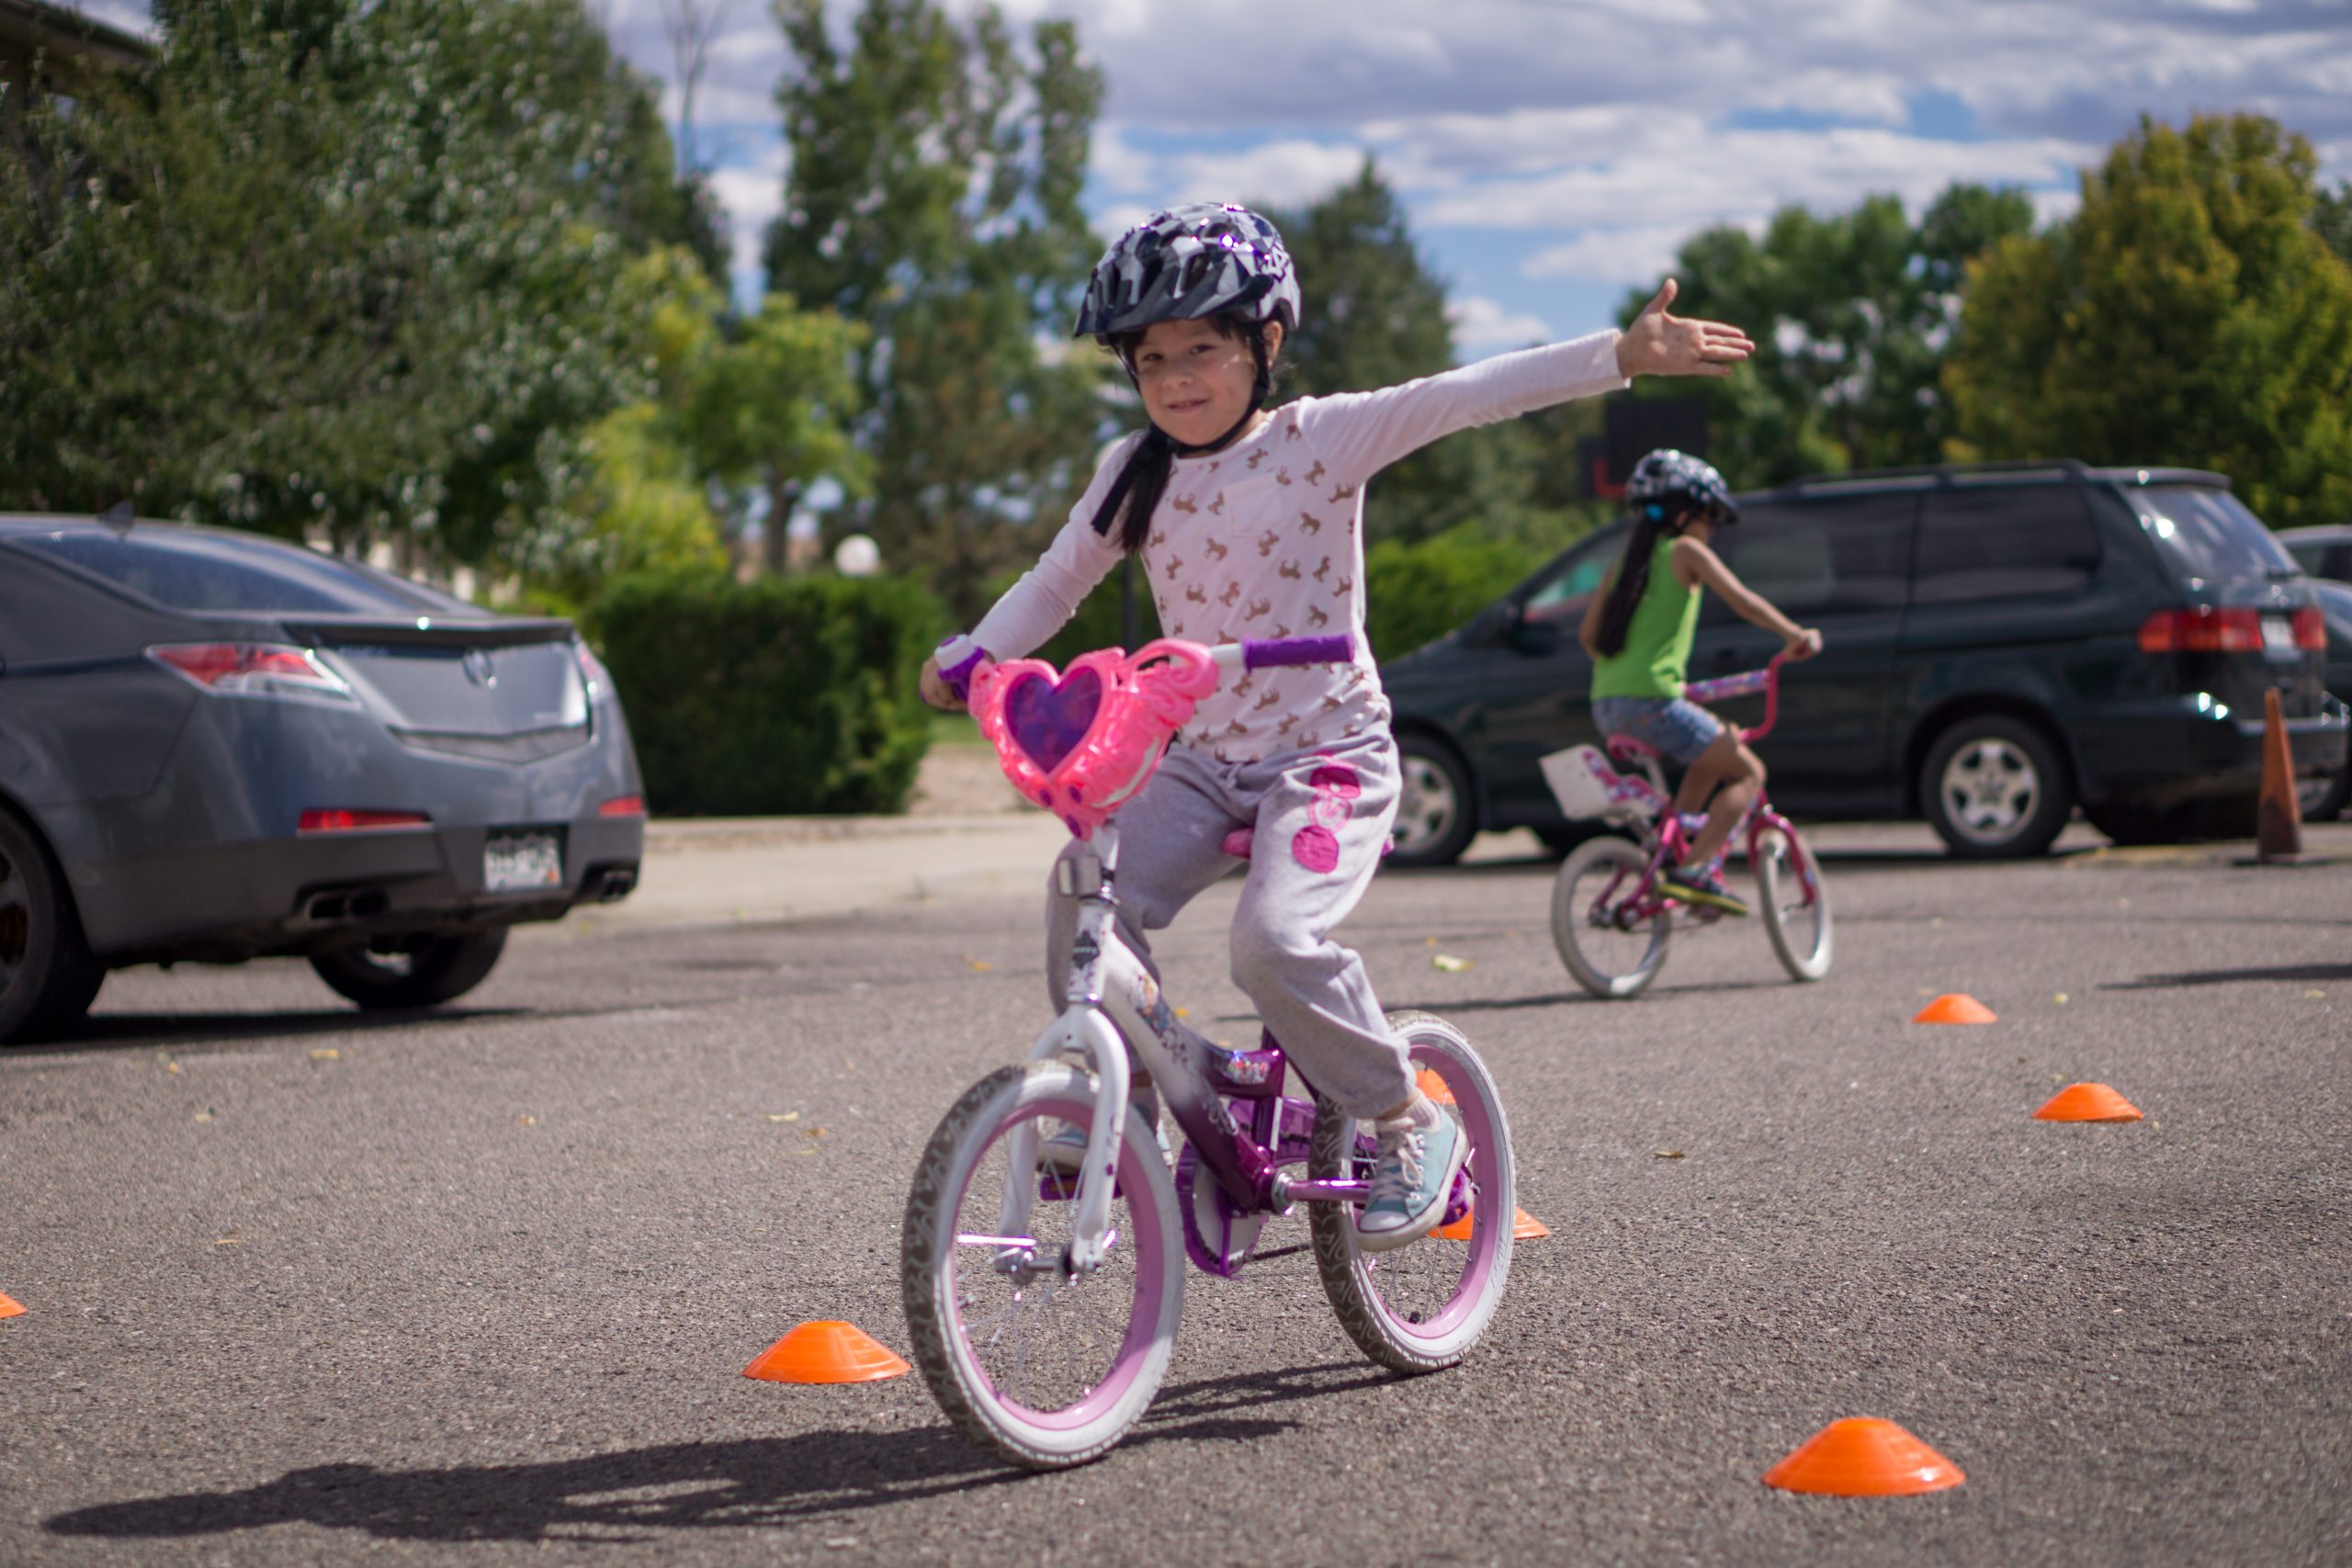 Young children participating in youth bike rodeo